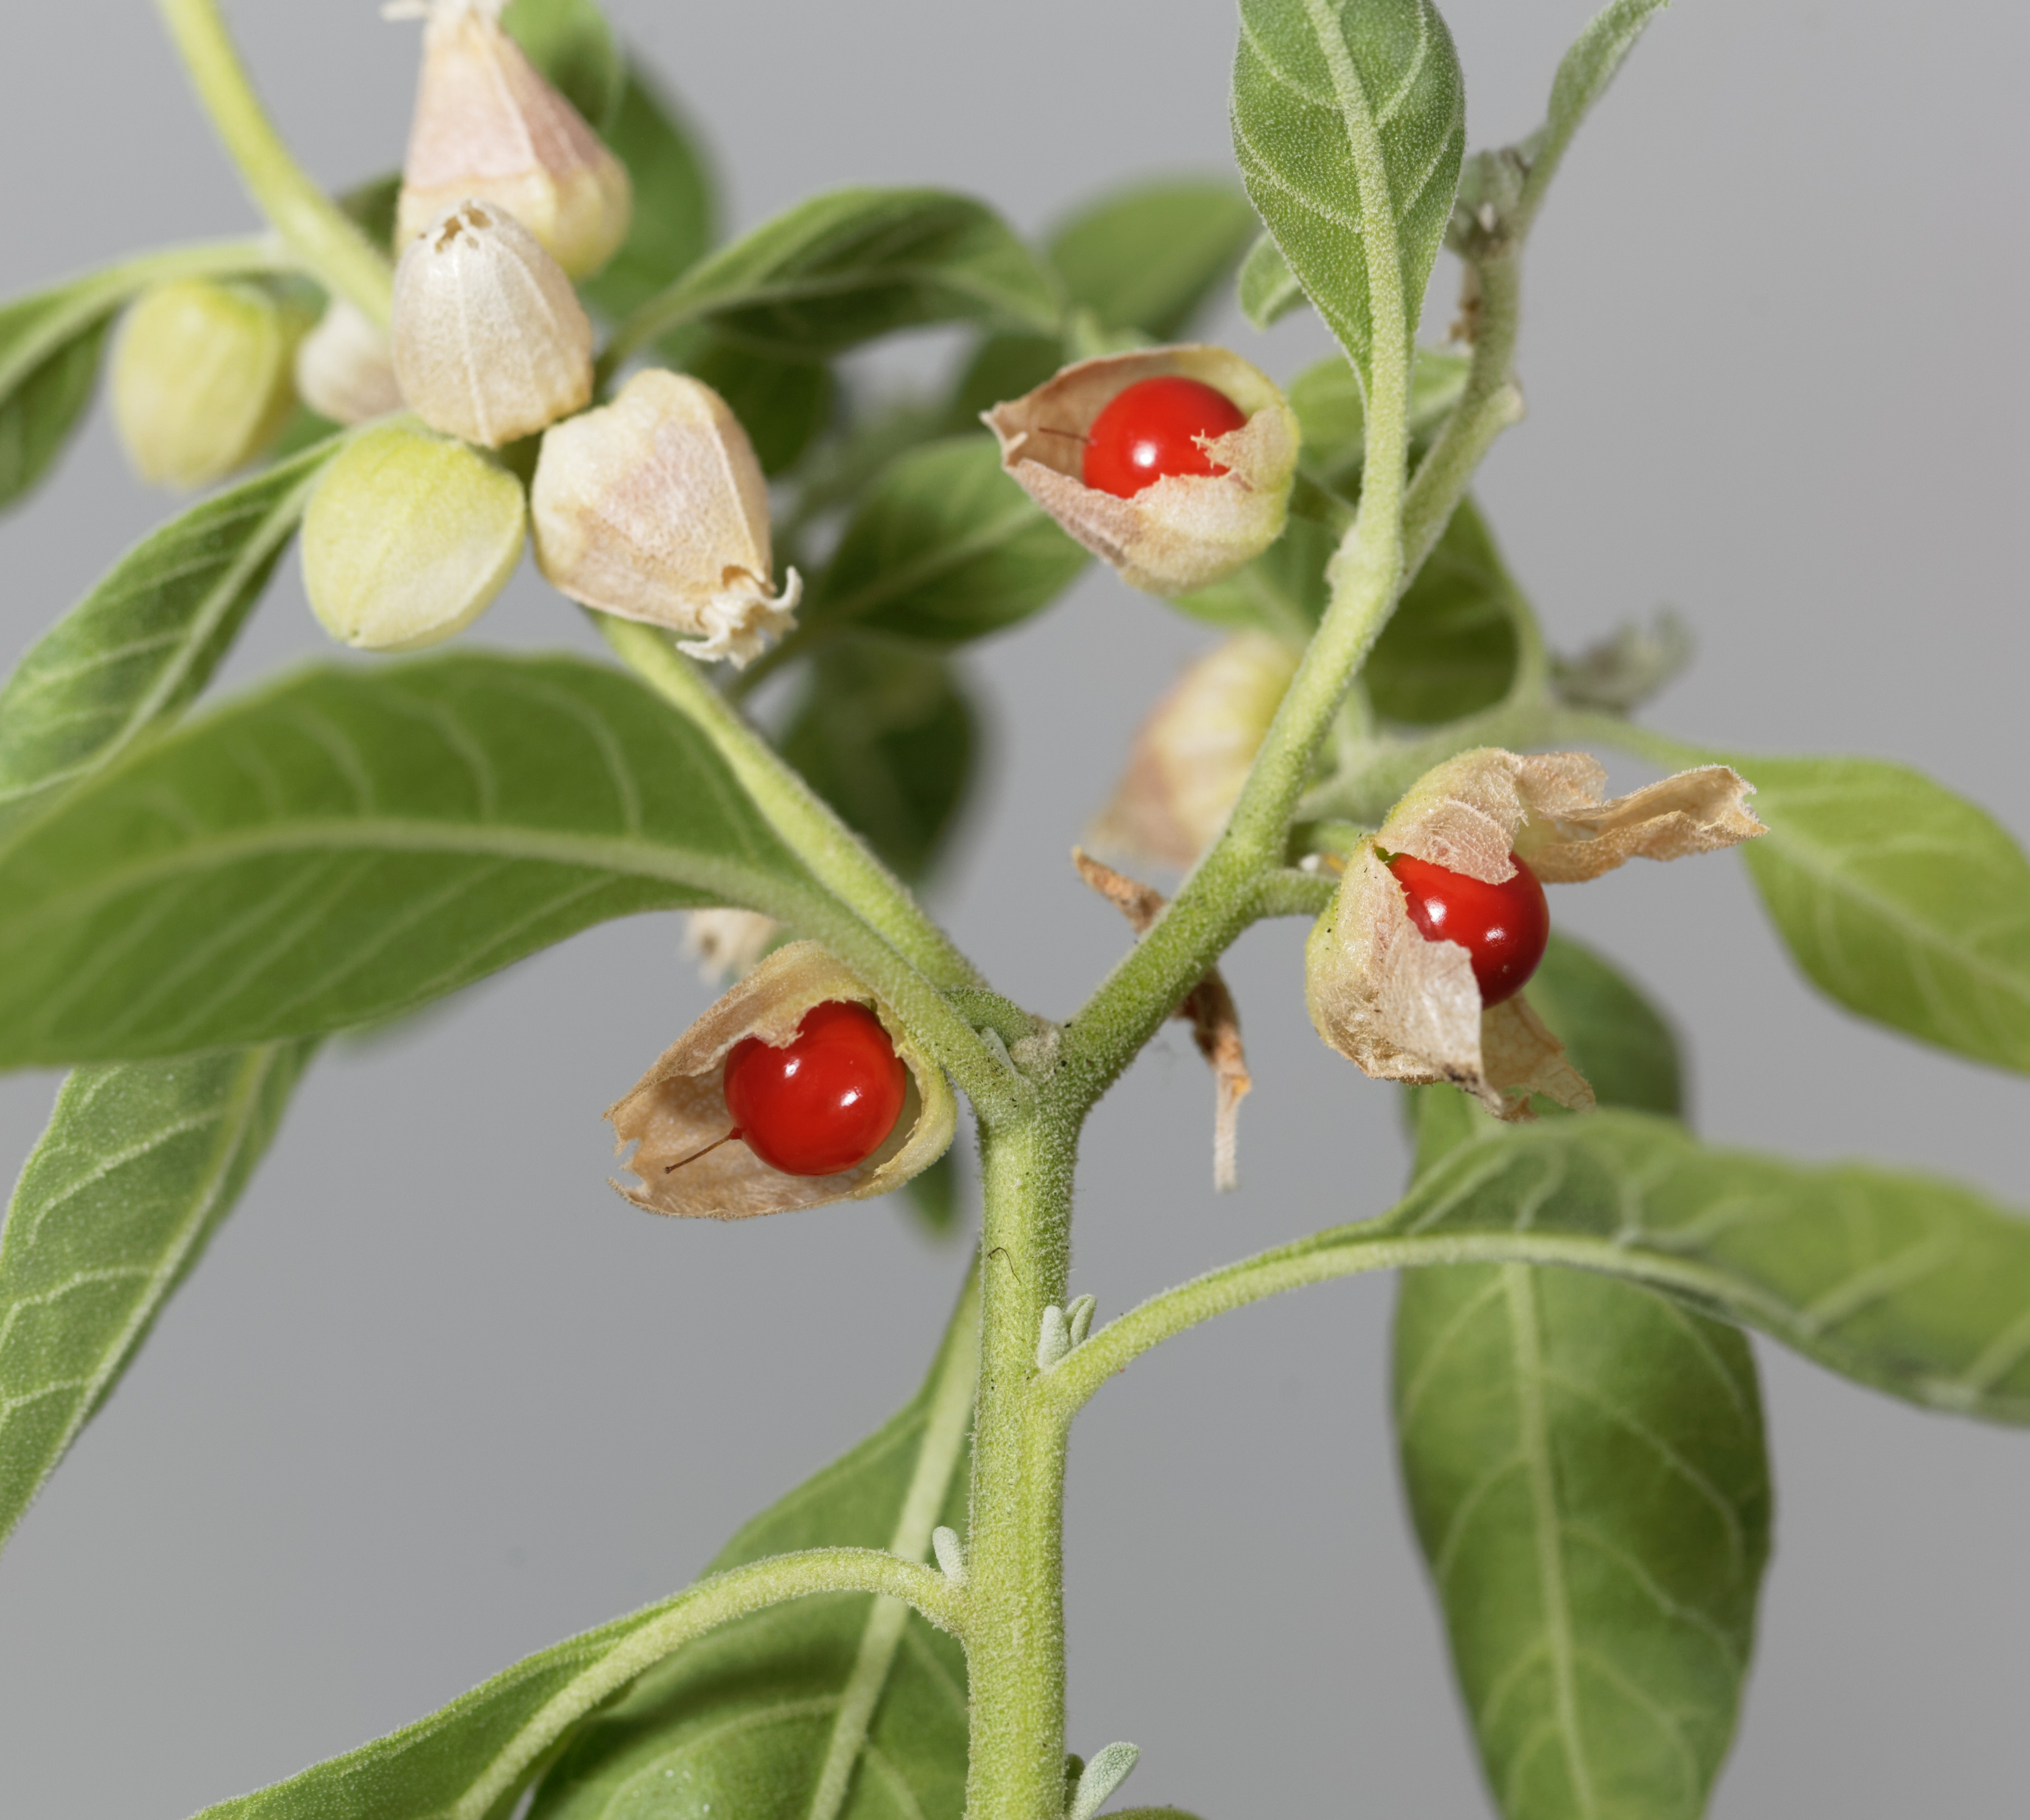 Plant which provides us with the Ashwagandha medicine and its numerous benefits